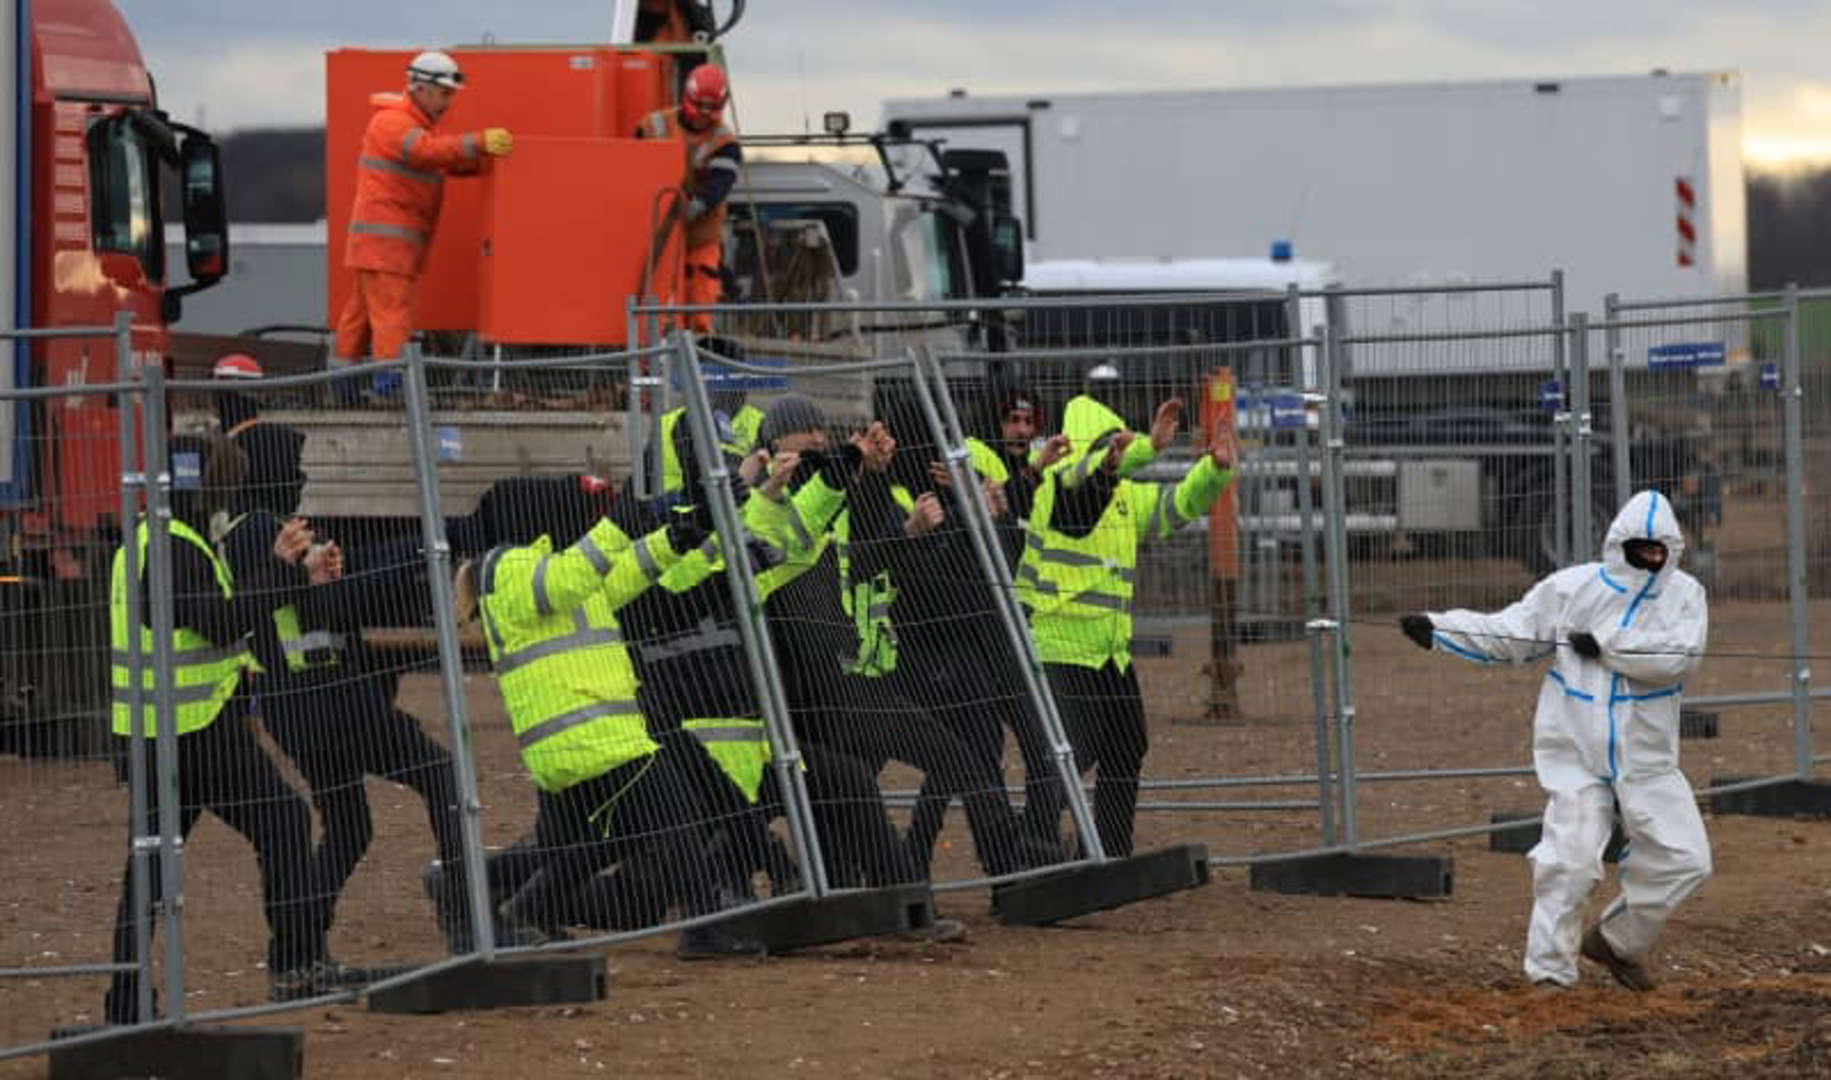 Climate protection activists try to knock down a fence on the outskirts of Luetzerath. The village of Luetzerath is to be mined for the expansion of the Garzweiler II open pit lignite mine. Photo: Oliver Berg / DPA